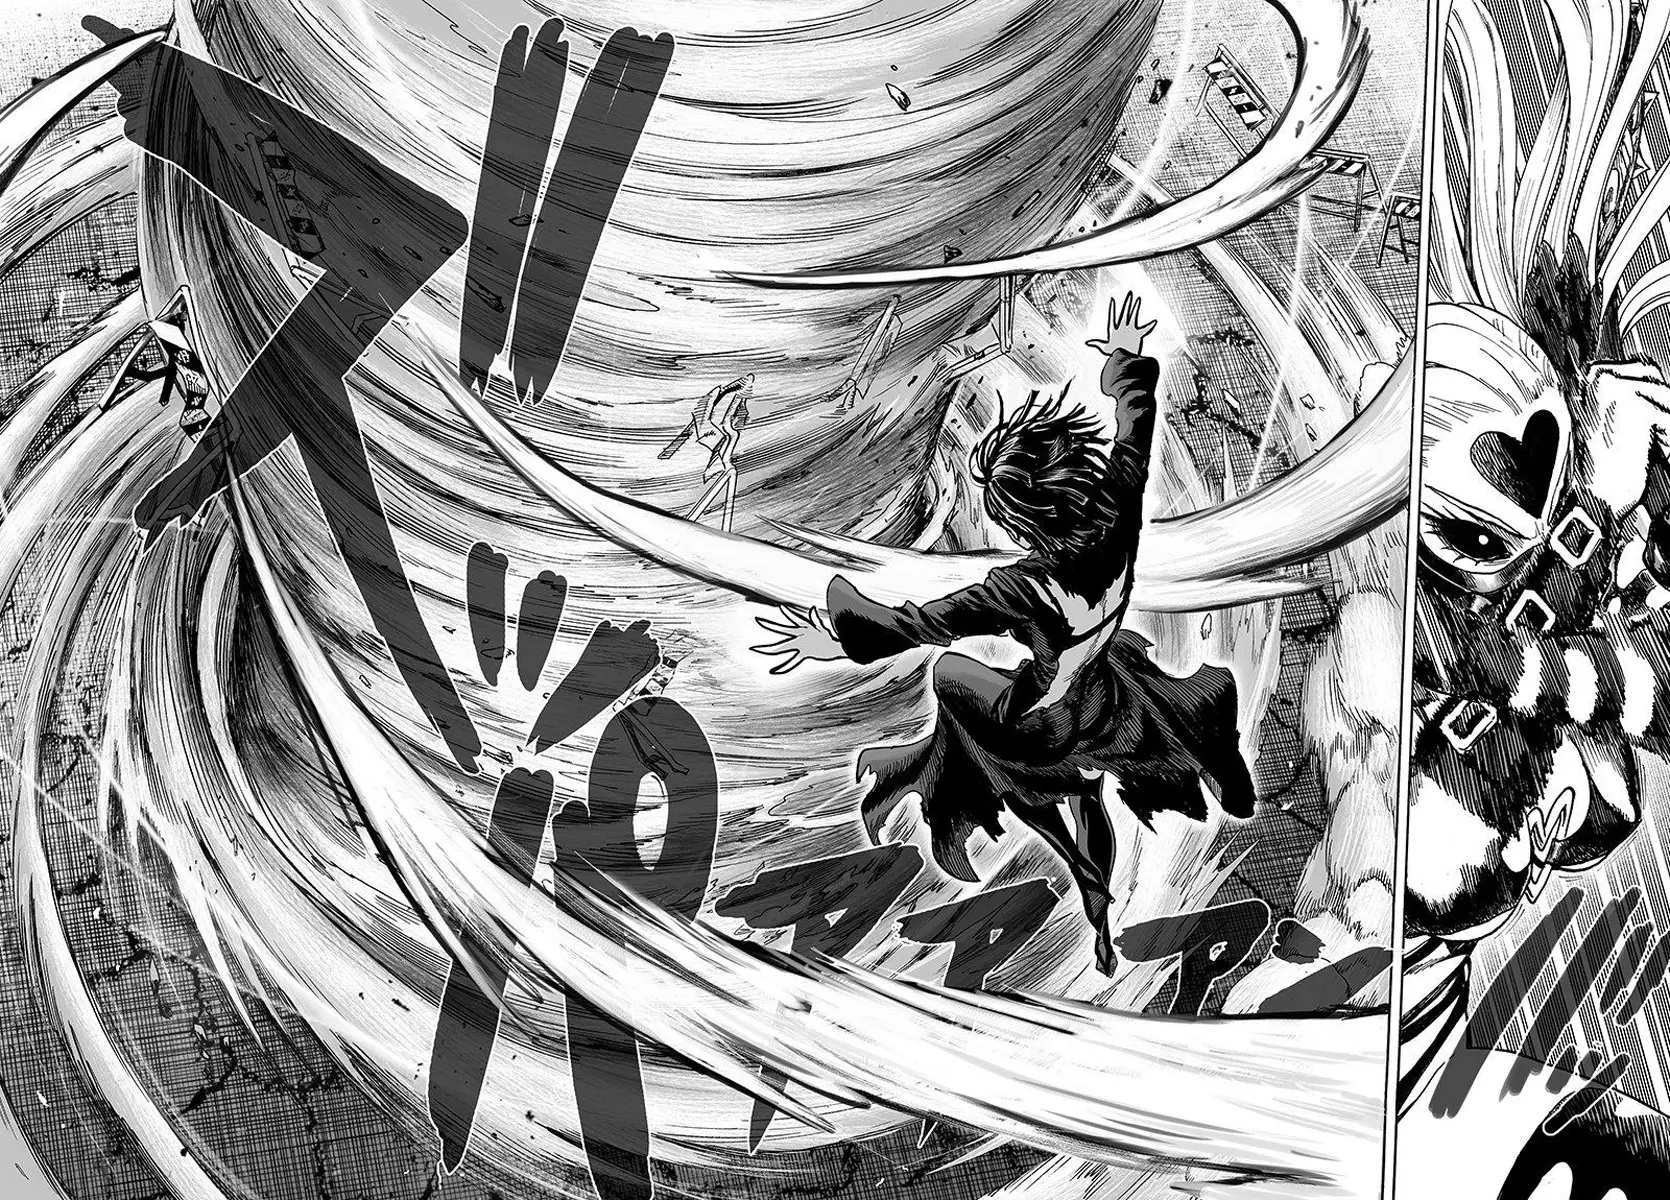 One Punch Man Chapter 65, READ One Punch Man Chapter 65 ONLINE, lost in the cloud genre,lost in the cloud gif,lost in the cloud girl,lost in the cloud goods,lost in the cloud goodreads,lost in the cloud,lost ark cloud gaming,lost odyssey cloud gaming,lost in the cloud fanart,lost in the cloud fanfic,lost in the cloud fandom,lost in the cloud first kiss,lost in the cloud font,lost in the cloud ending,lost in the cloud episode 97,lost in the cloud edit,lost in the cloud explained,lost in the cloud dog,lost in the cloud discord server,lost in the cloud desktop wallpaper,lost in the cloud drawing,can't find my cloud on network,lost in the cloud characters,lost in the cloud chapter 93 release date,lost in the cloud birthday,lost in the cloud birthday art,lost in the cloud background,lost in the cloud banner,lost in the clouds meaning,what is the black cloud in lost,lost in the cloud ao3,lost in the cloud anime,lost in the cloud art,lost in the cloud author twitter,lost in the cloud author instagram,lost in the cloud artist,lost in the cloud acrylic stand,lost in the cloud artist twitter,lost in the cloud art style,lost in the cloud analysis